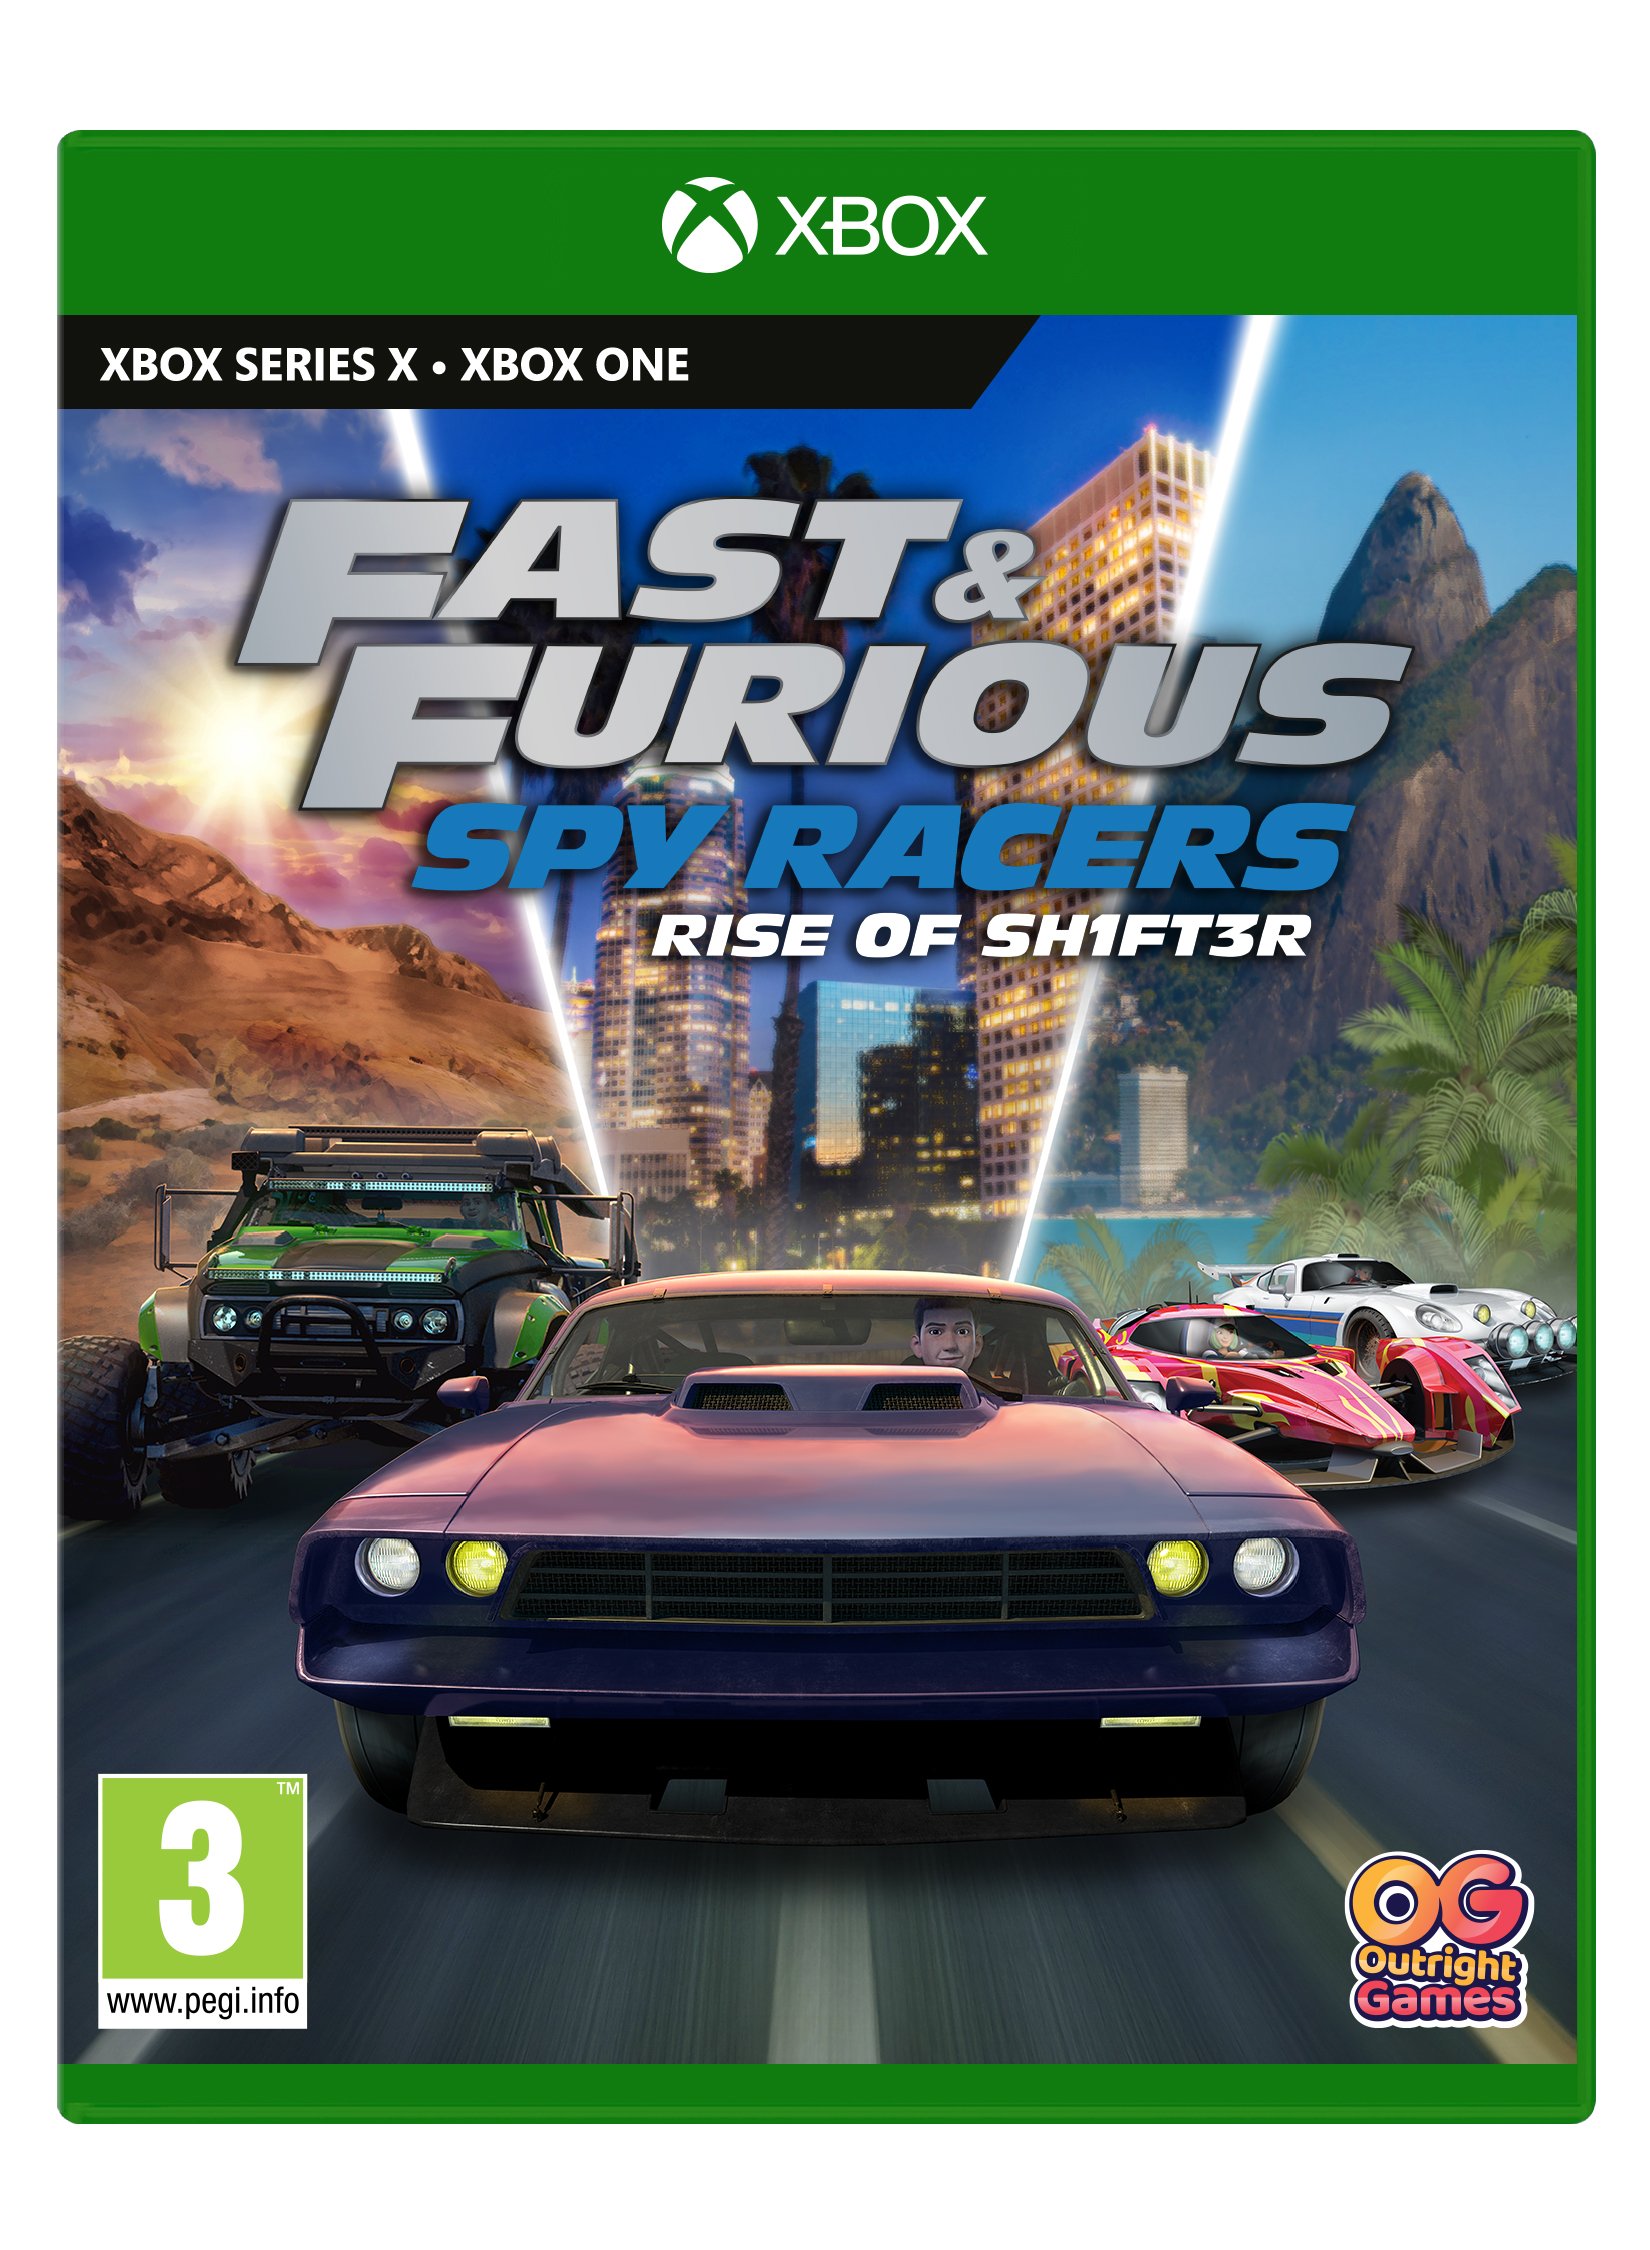 Fast&Furious: Spy Racers Rise of SH1FT3R (XBOX/XSERIESX)